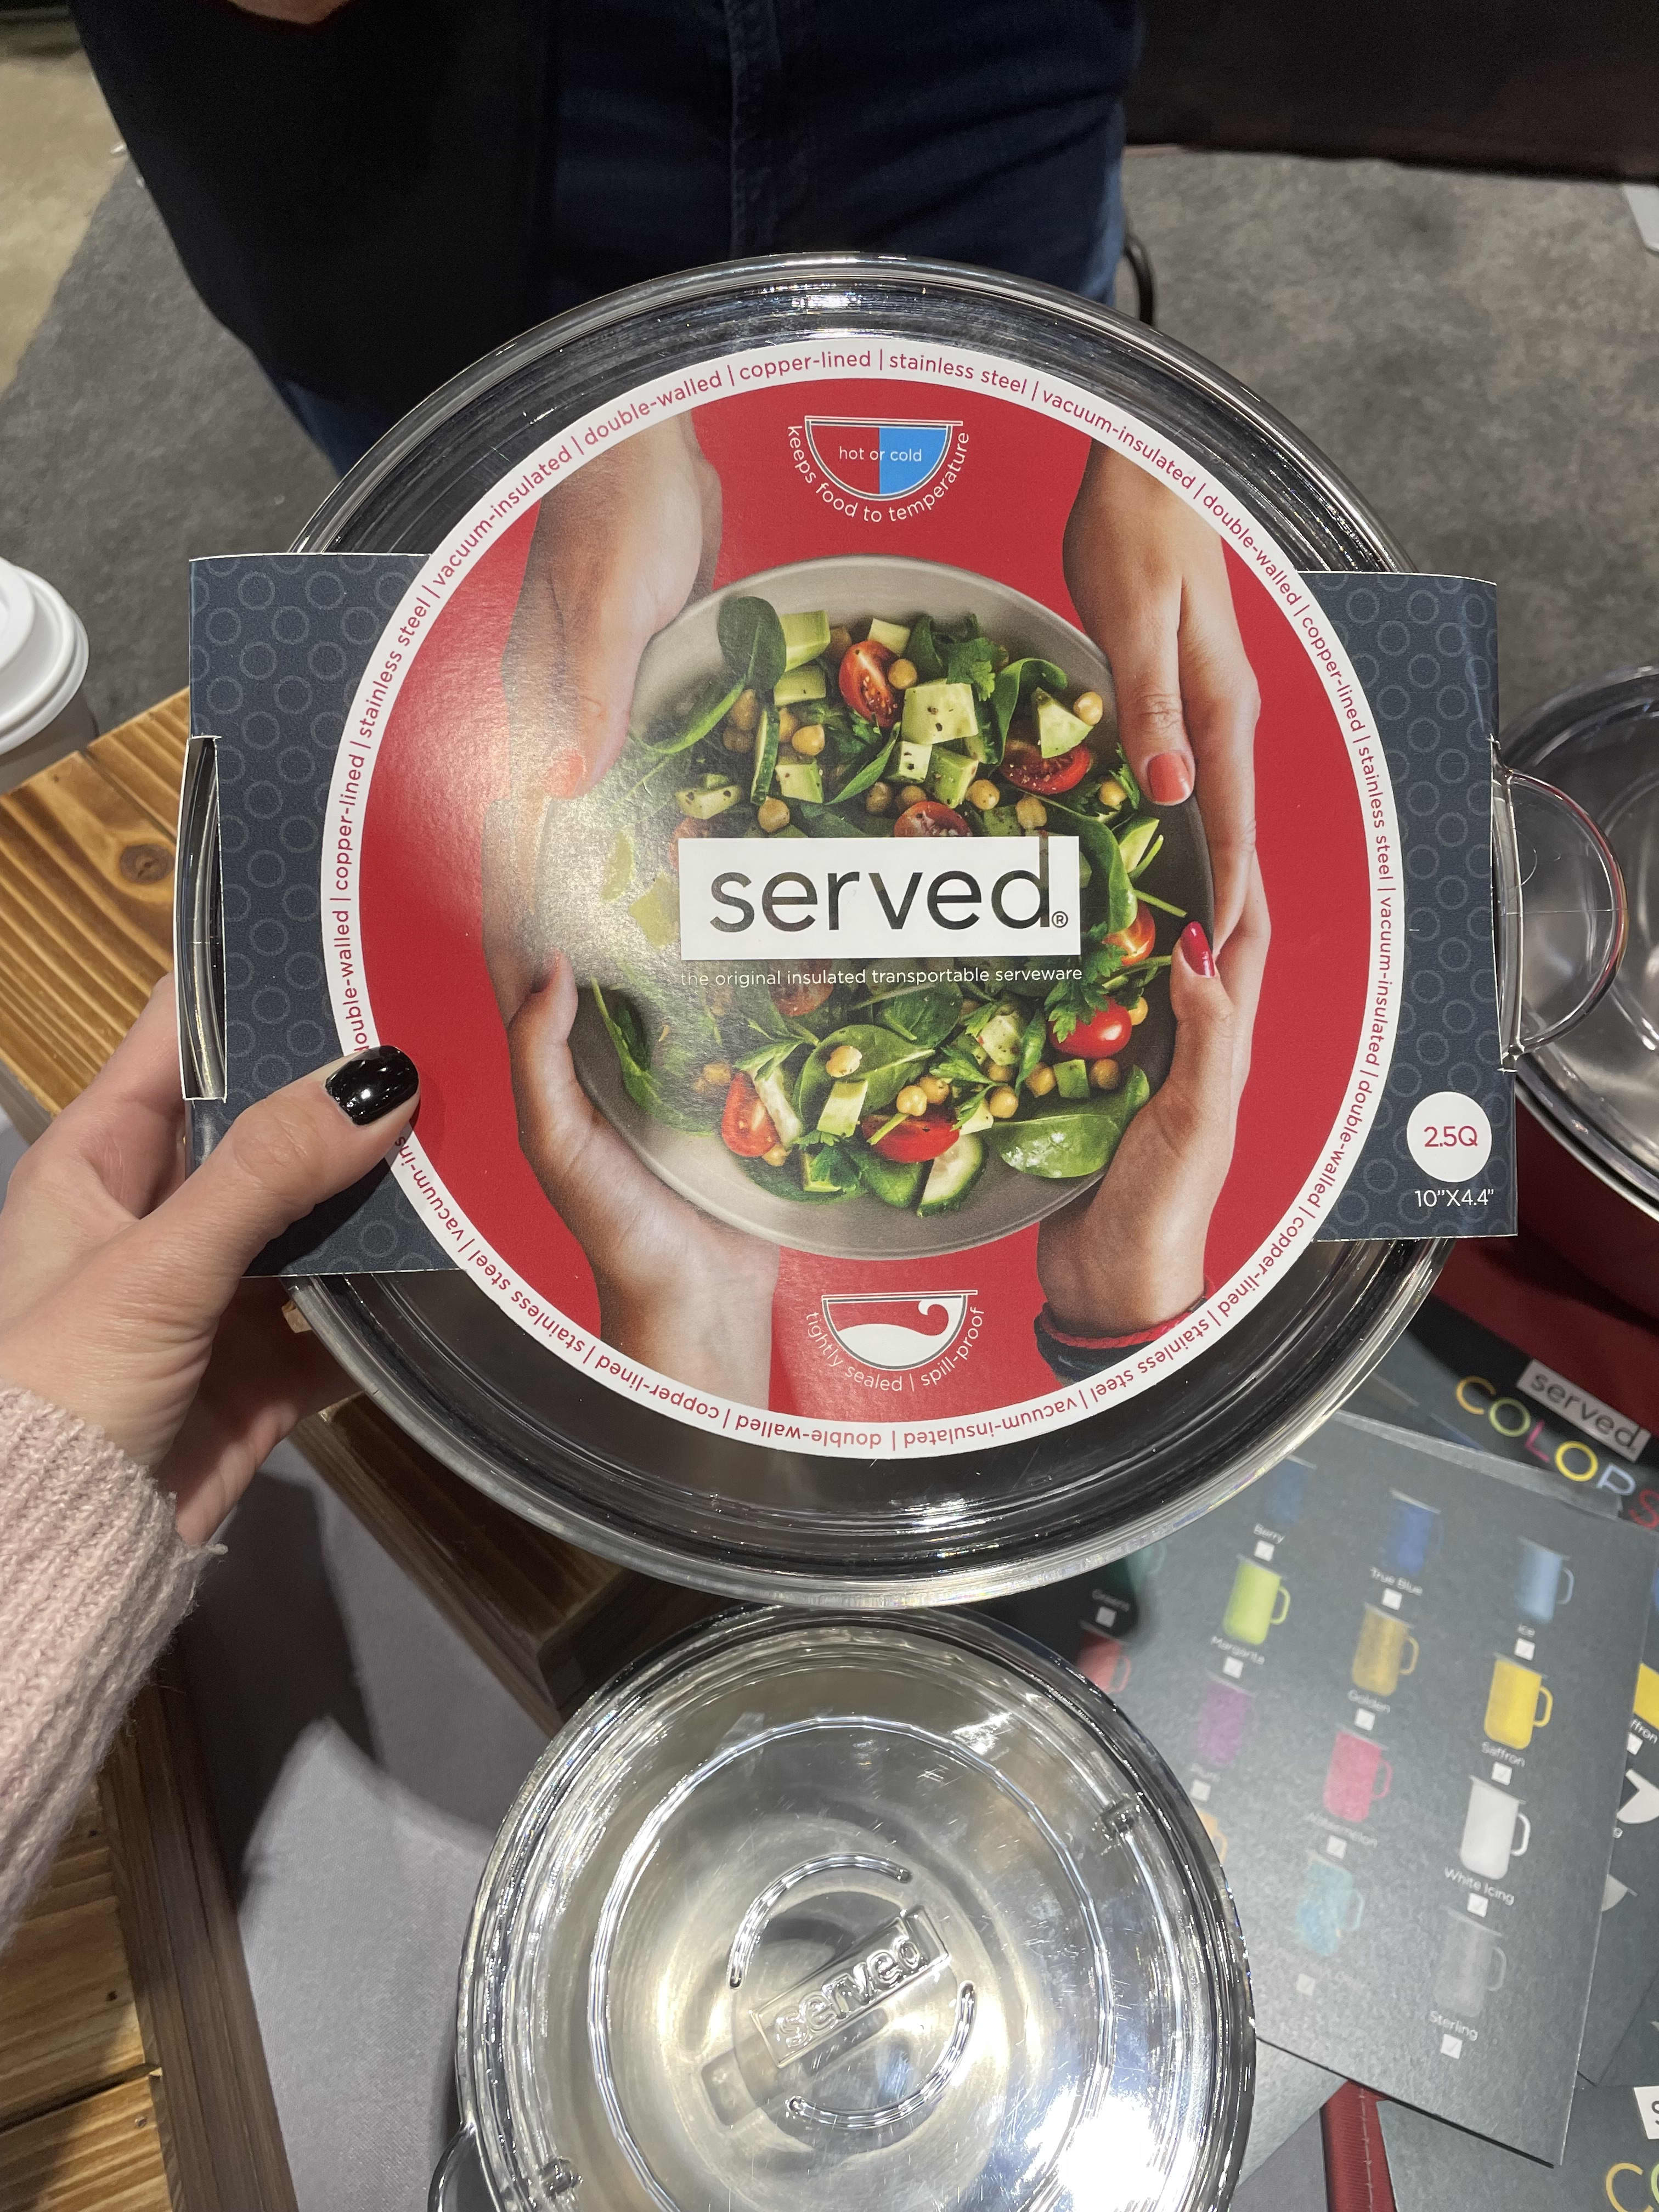 New Kitchen Gadgets Shown at the Inspired Home Housewares Show